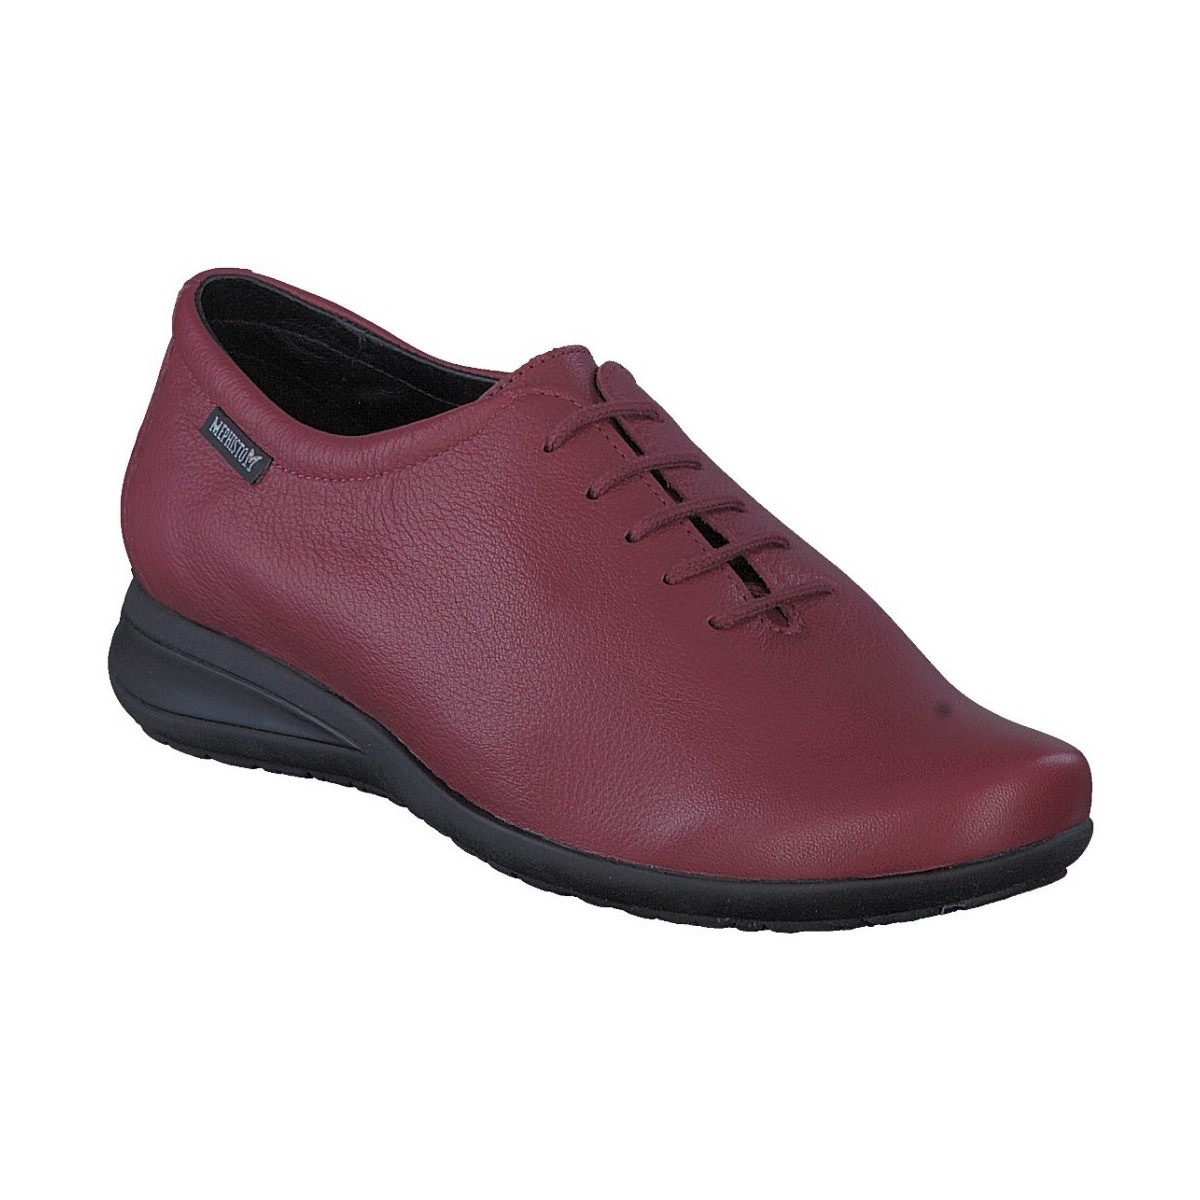 Chaussures Femme Mocassins Mephisto Chaussures en cuir NENCY Rouge